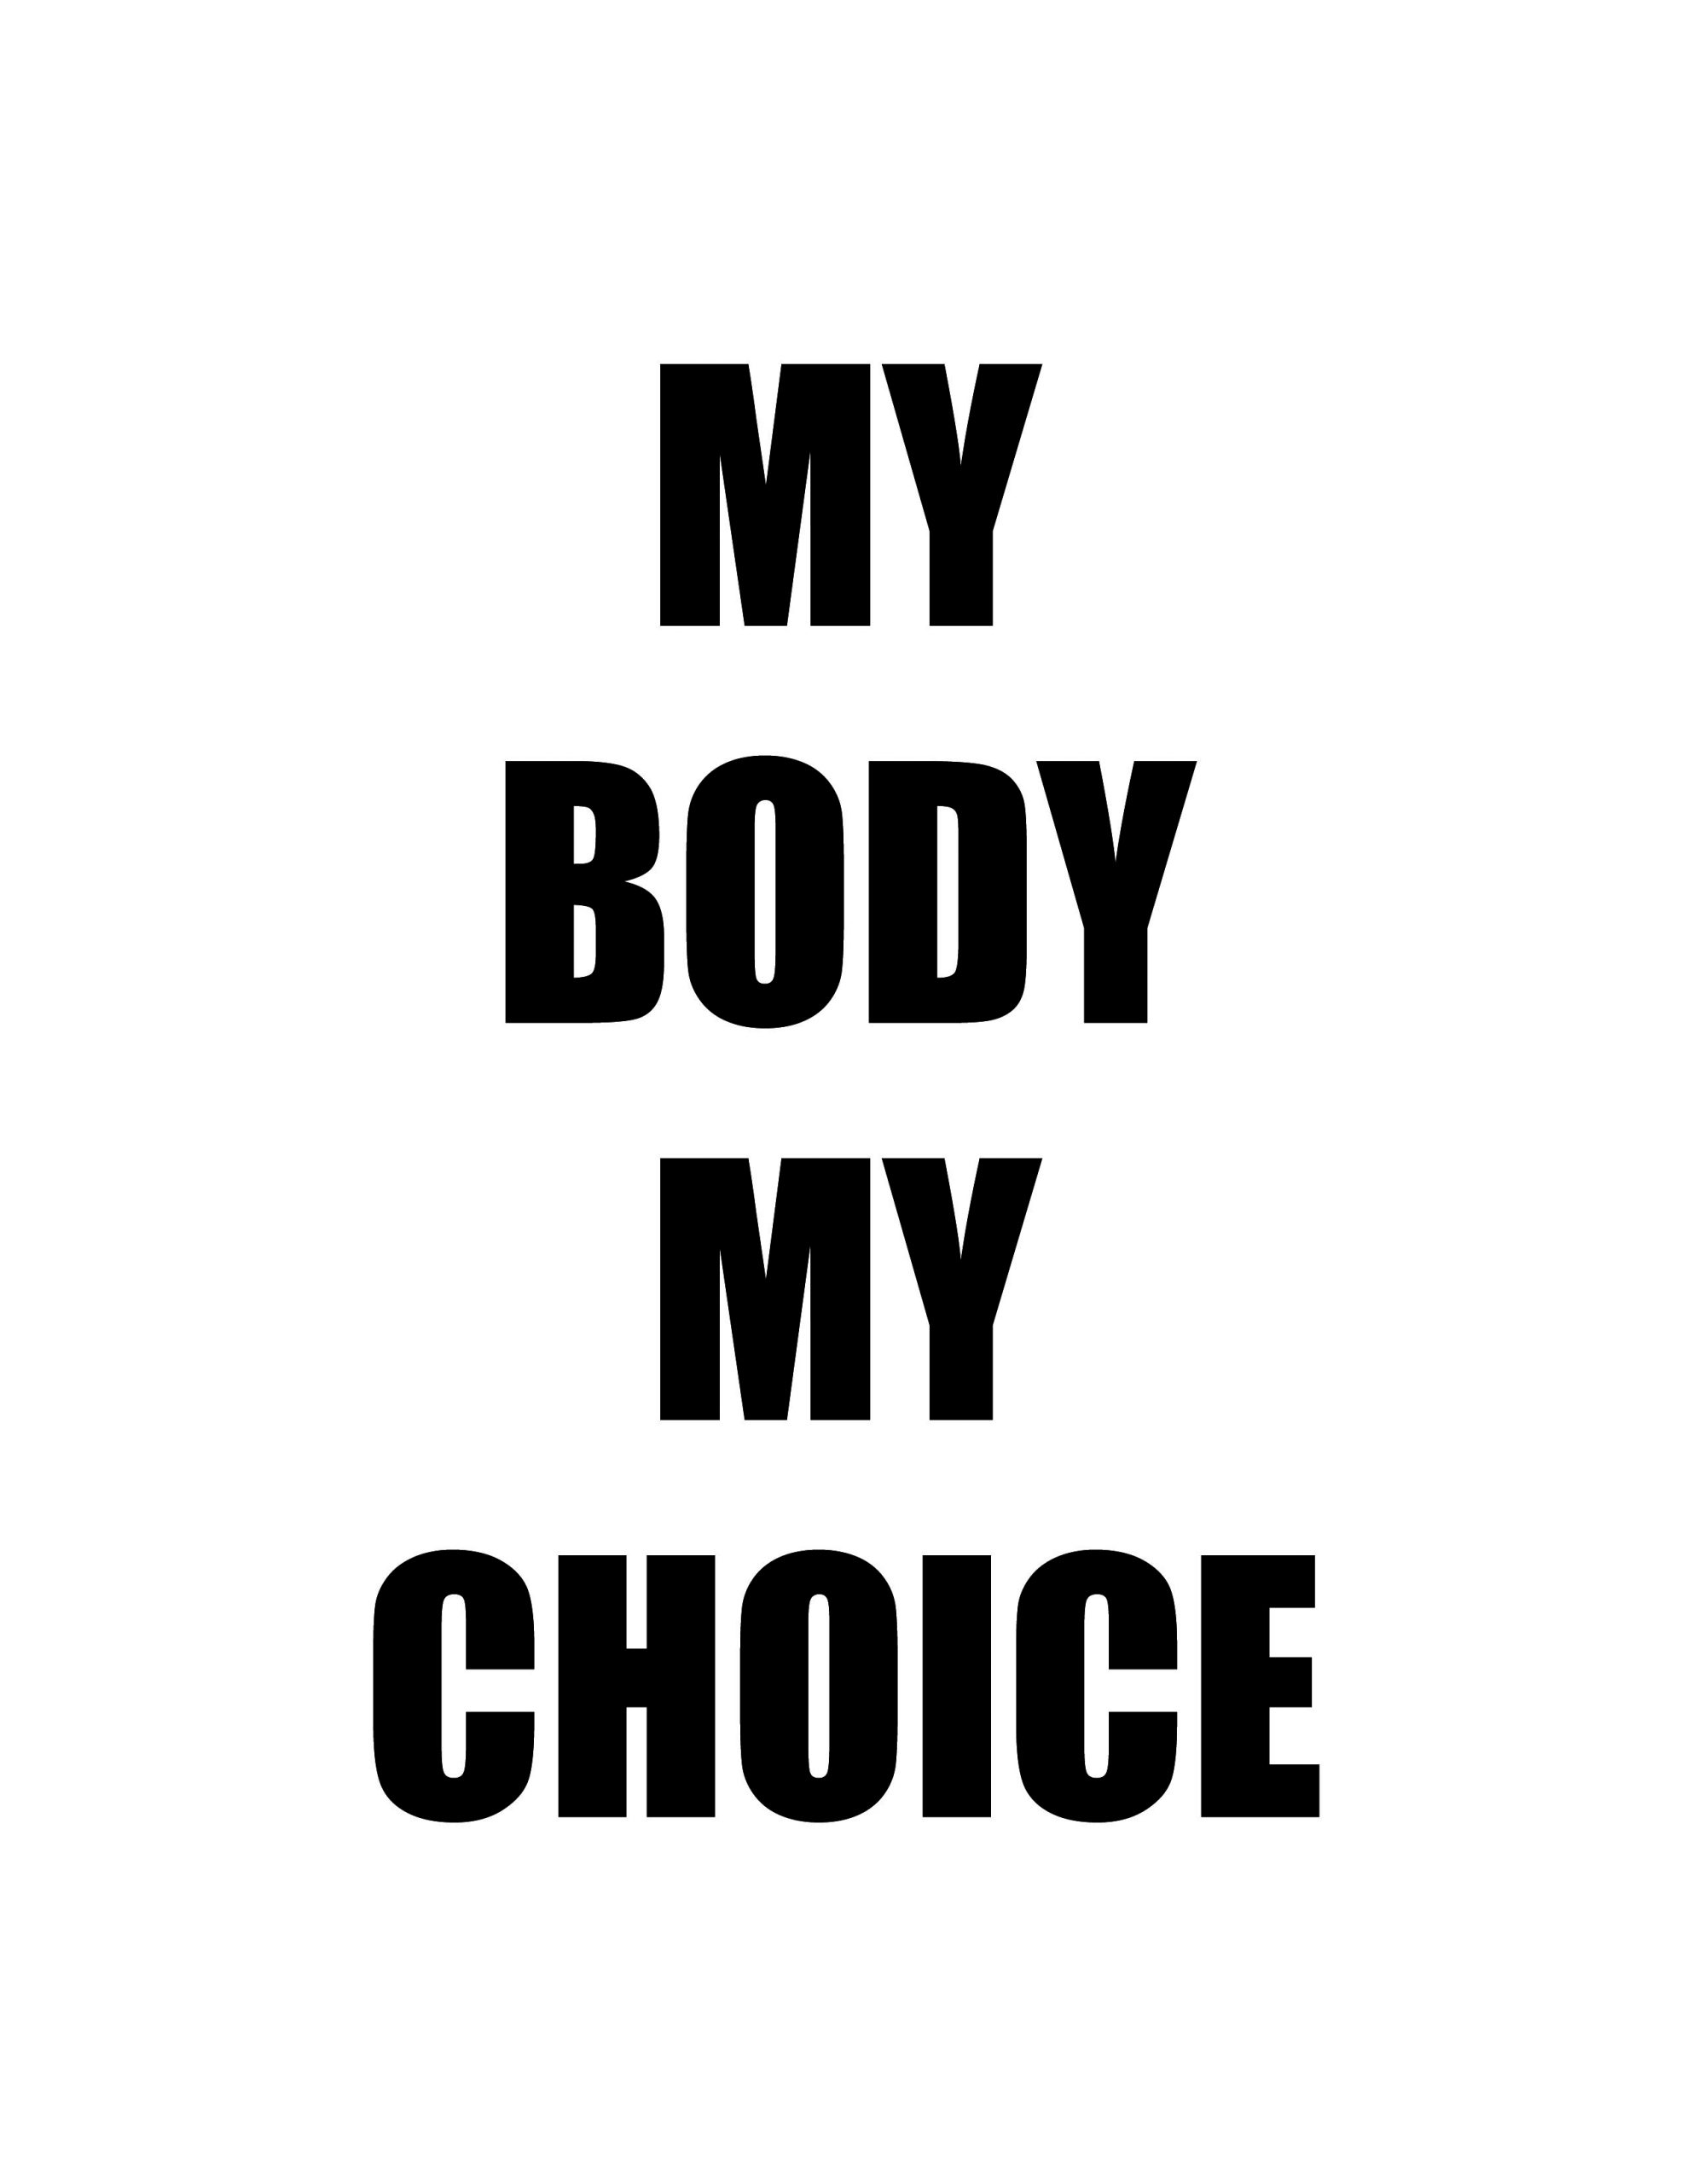 Free printable download of pro-choice poster design...